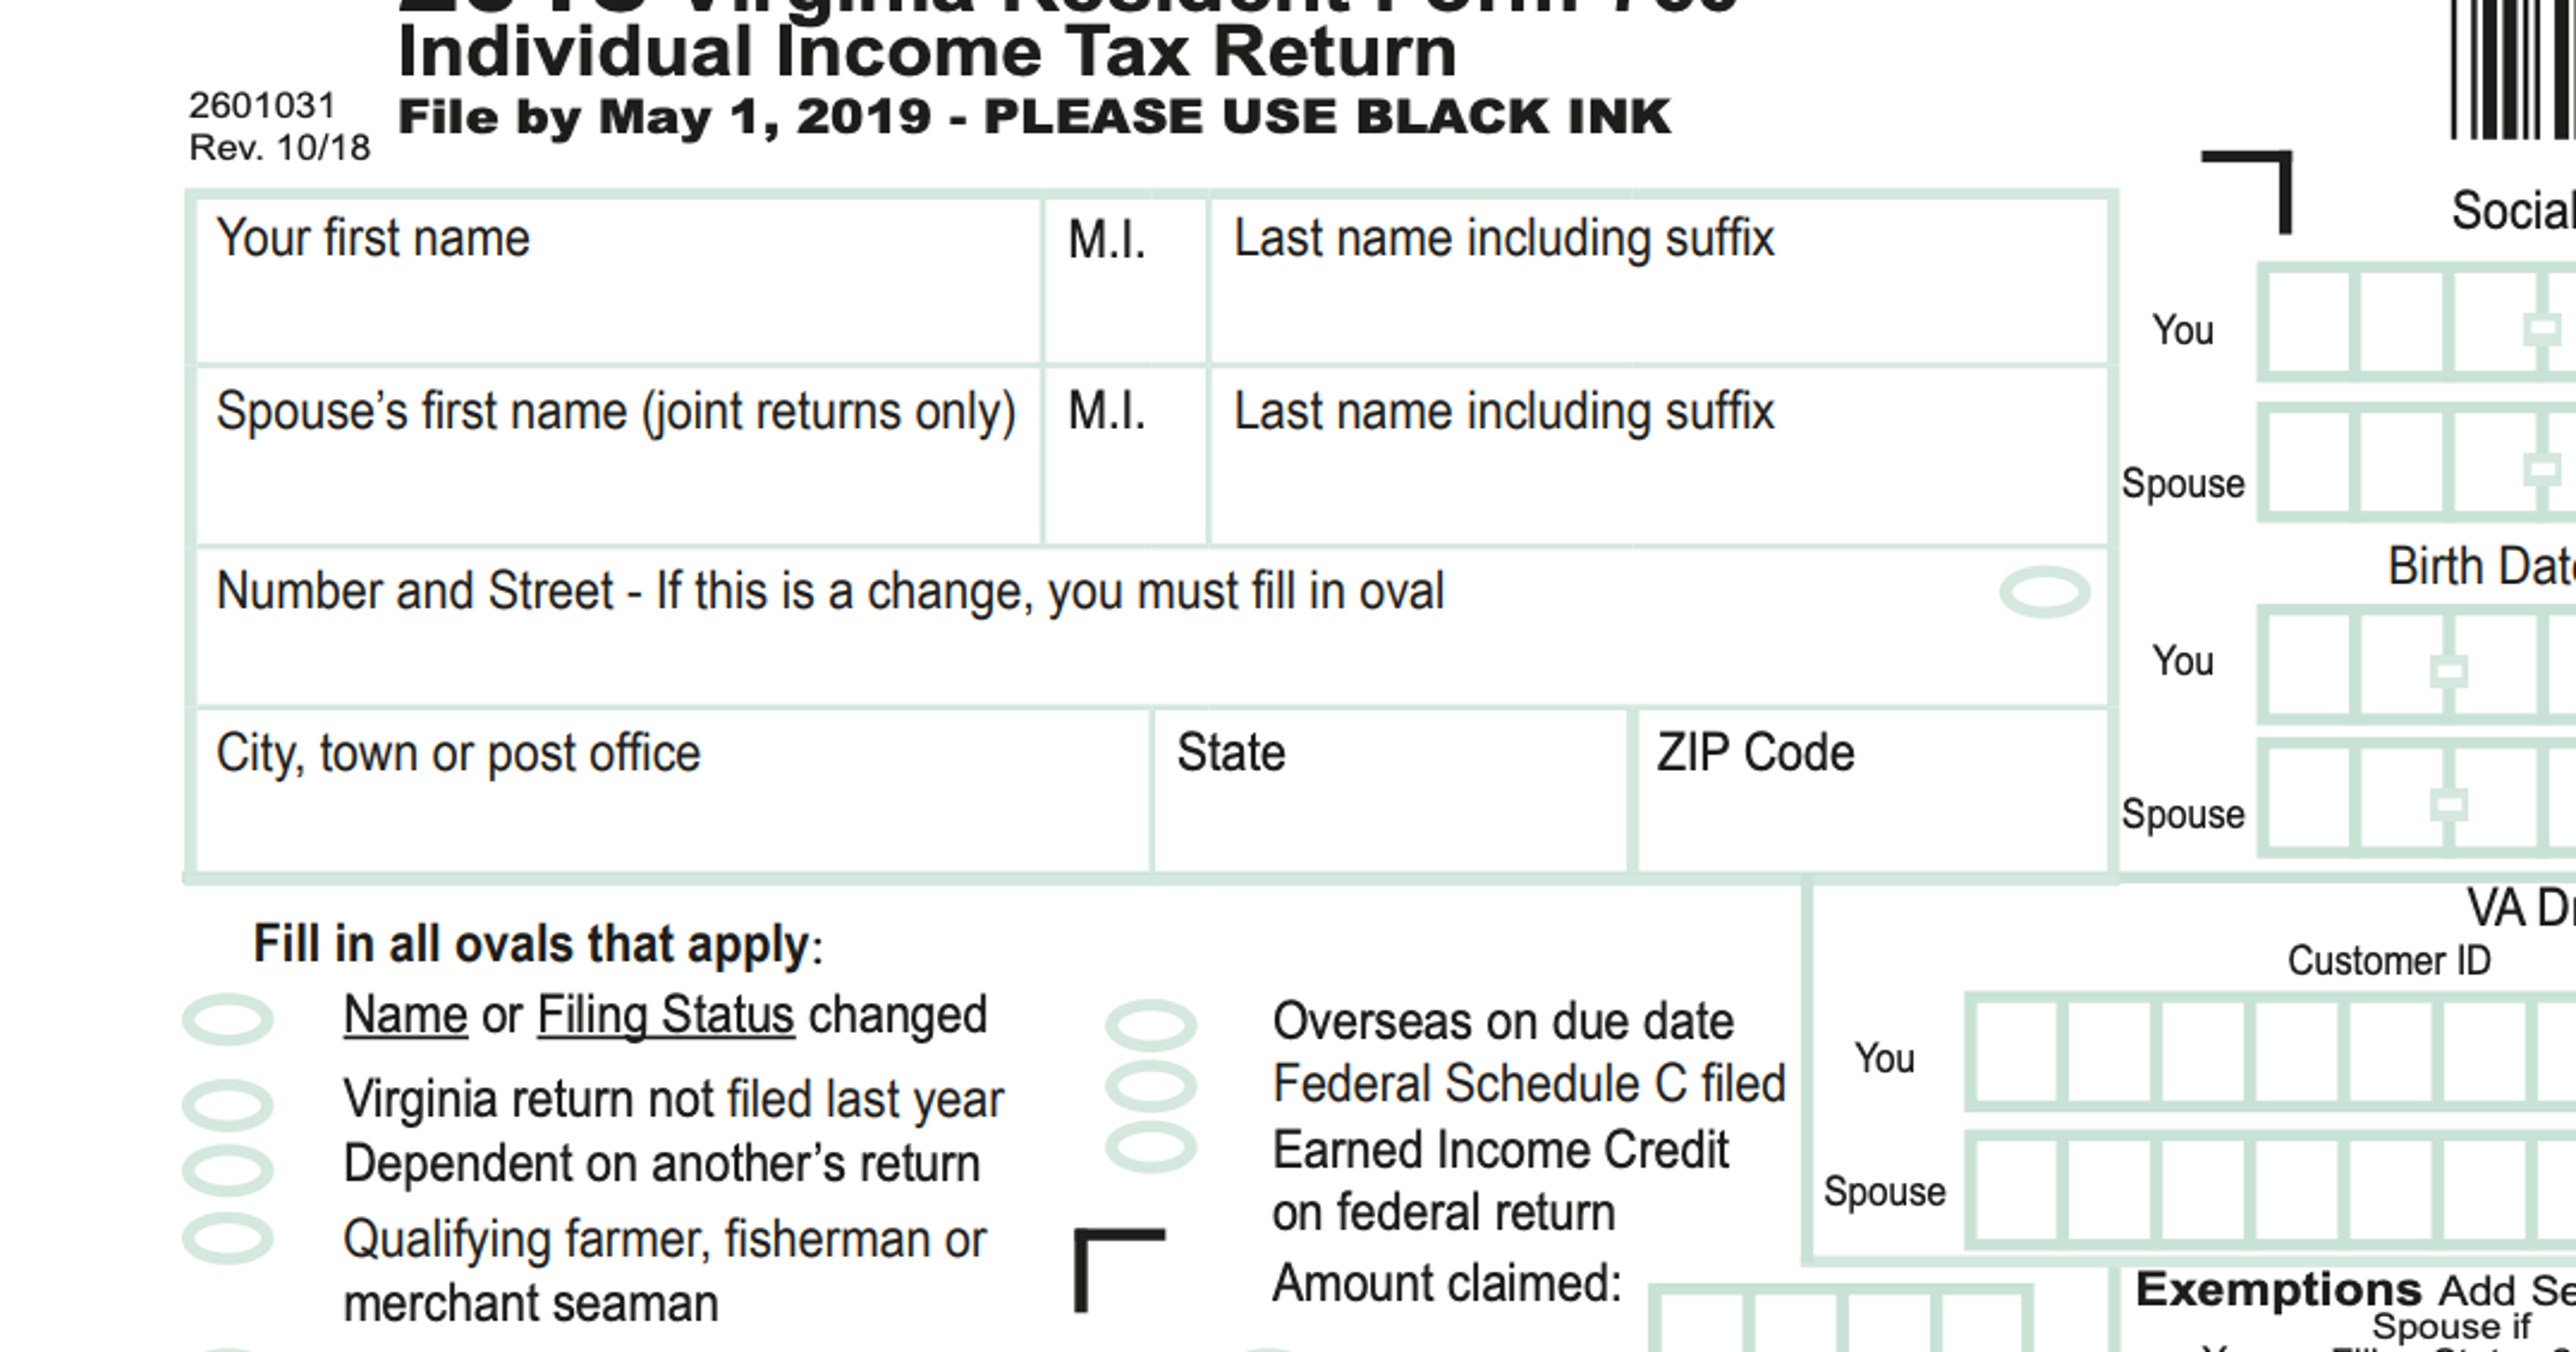 ready-to-file-virginia-tax-return-what-the-final-tax-law-looks-like-is